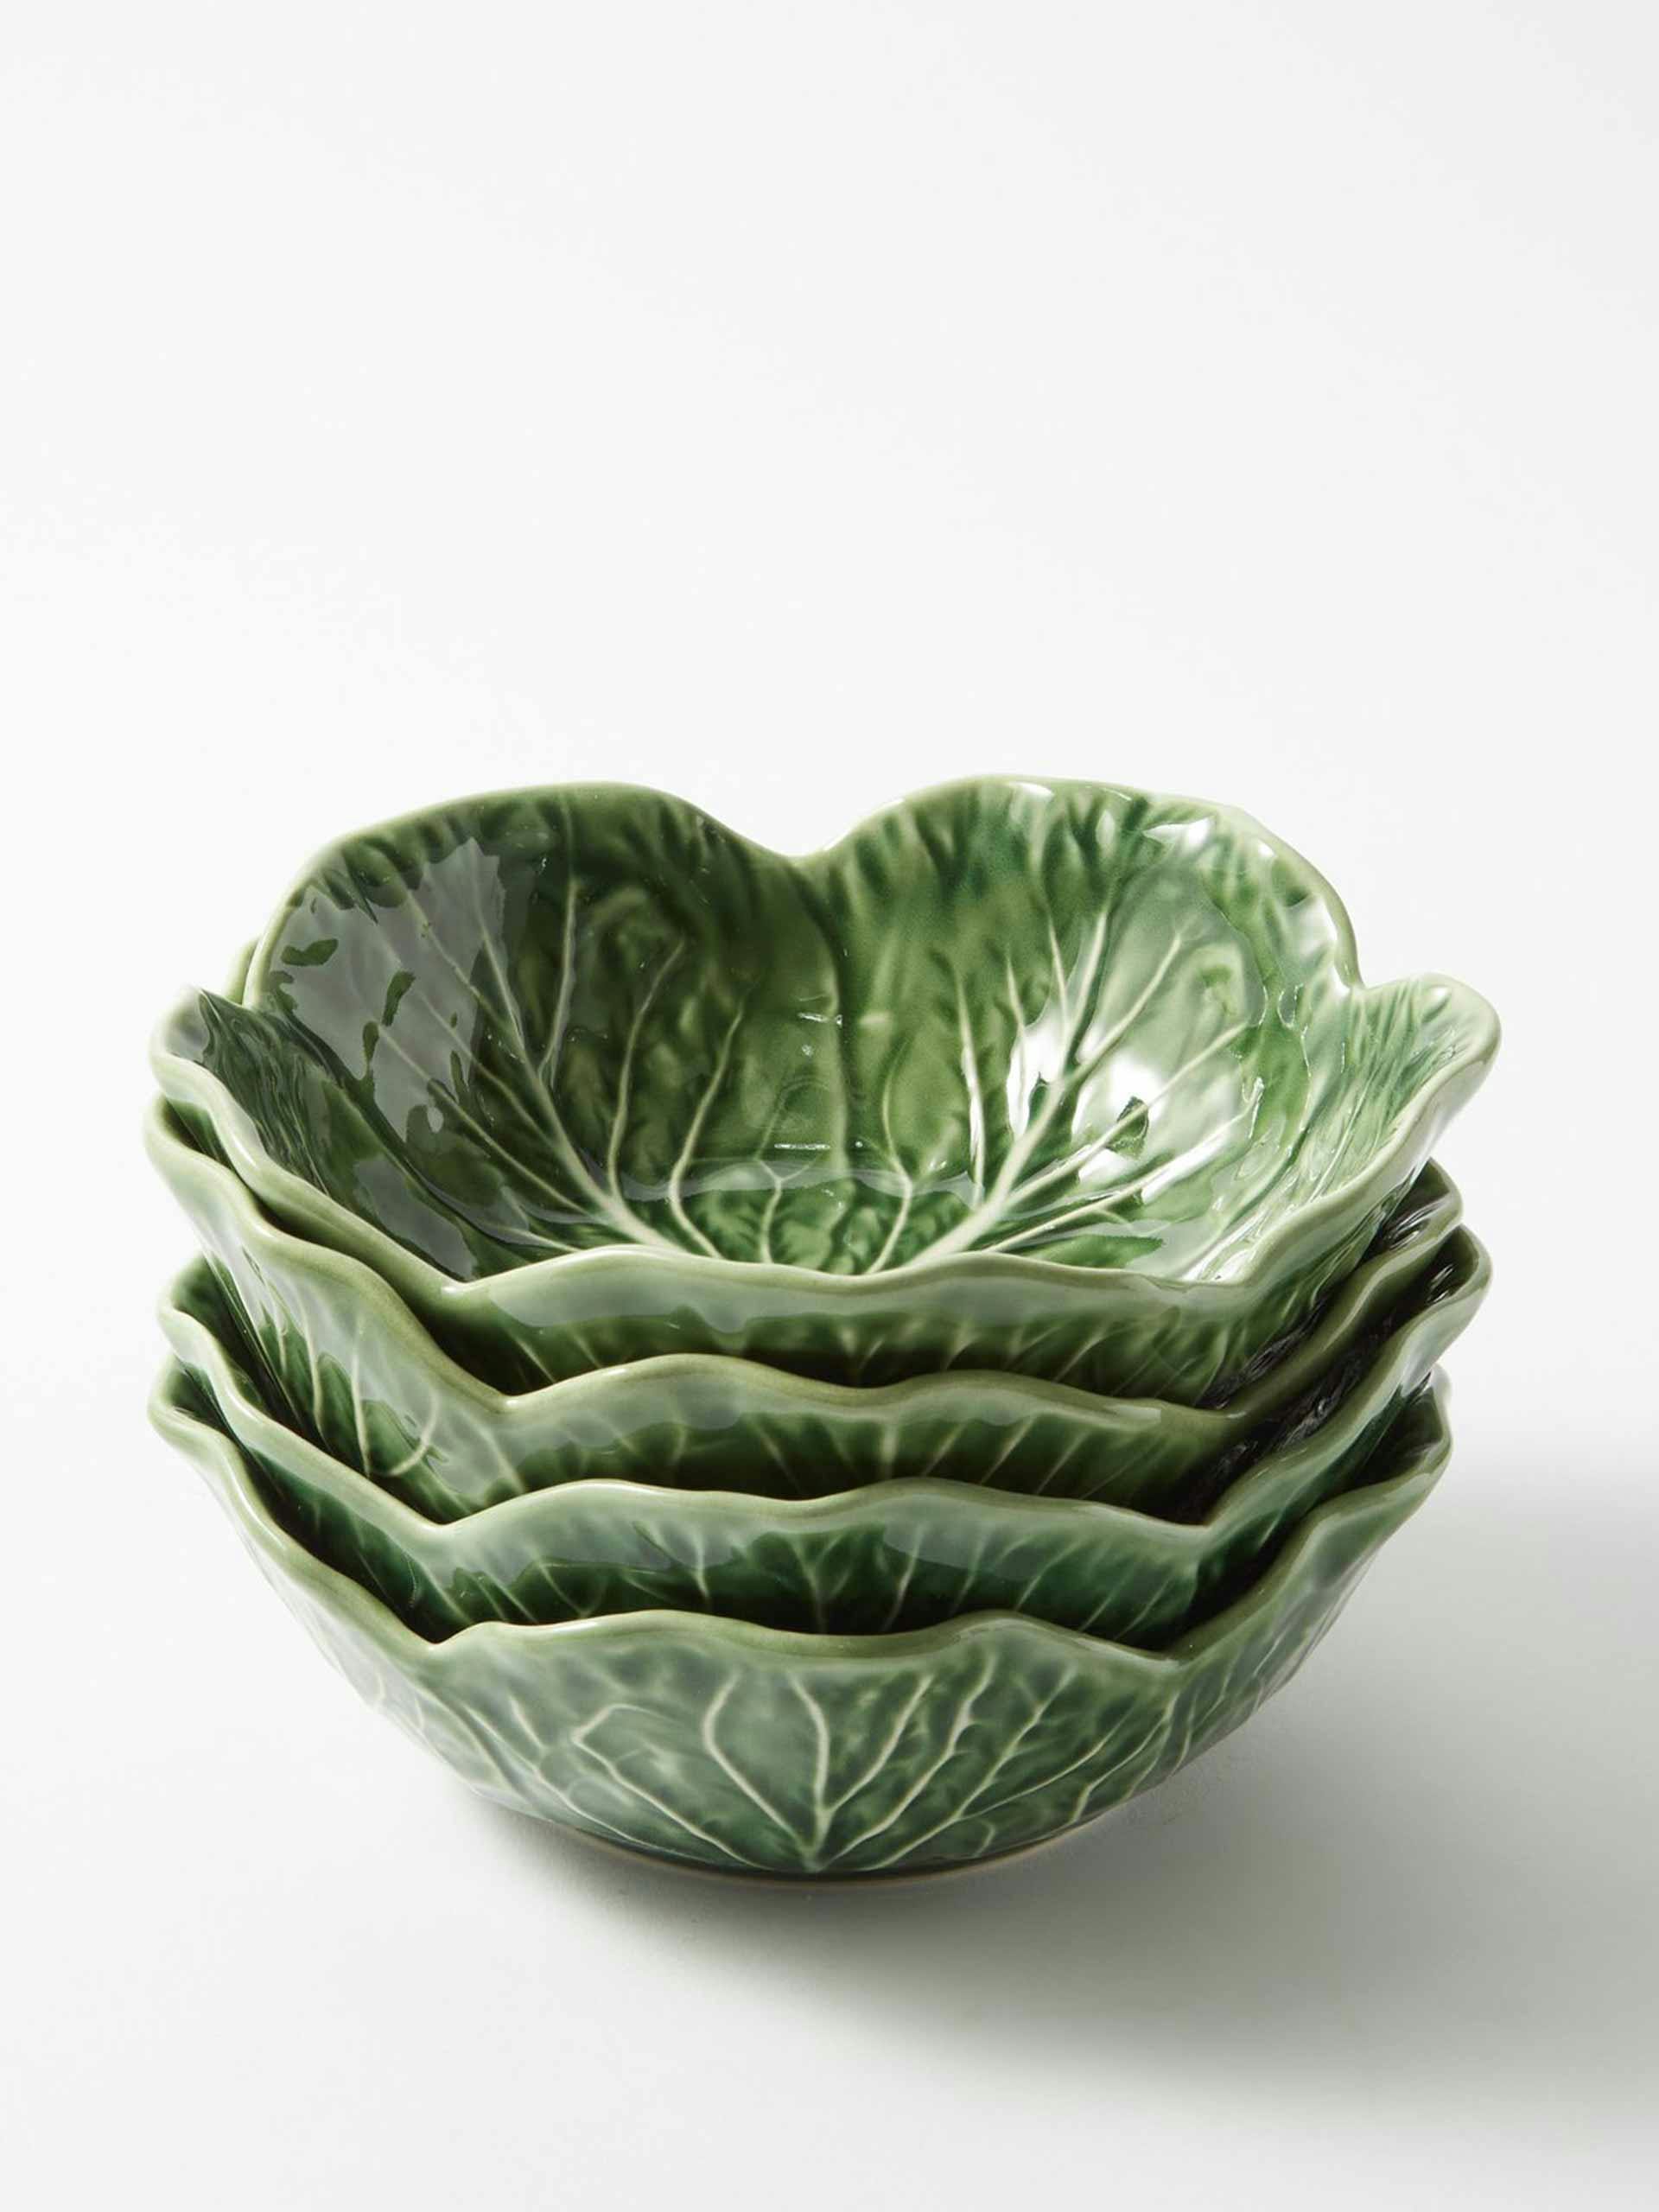 Cabbage earthenware pasta bowls (set of 4)